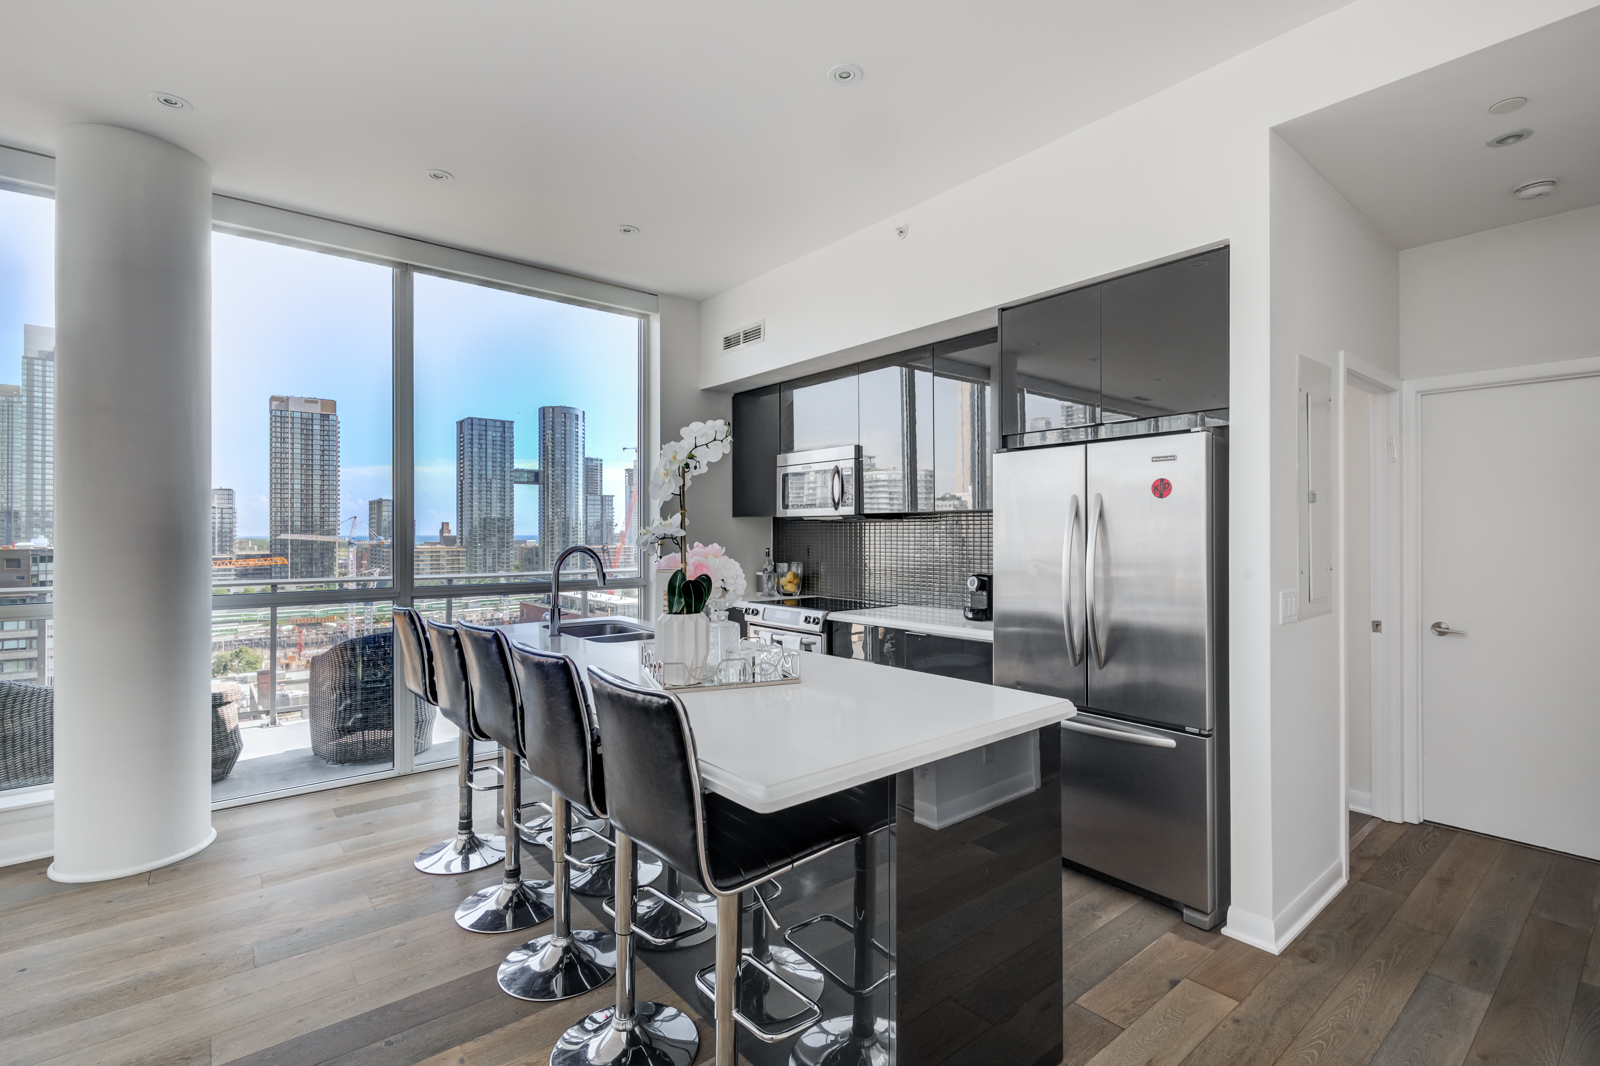 Breakfast bar and kitchen island with stools - Victory Lofts Penthouse Suite in 478 King St W Toronto.